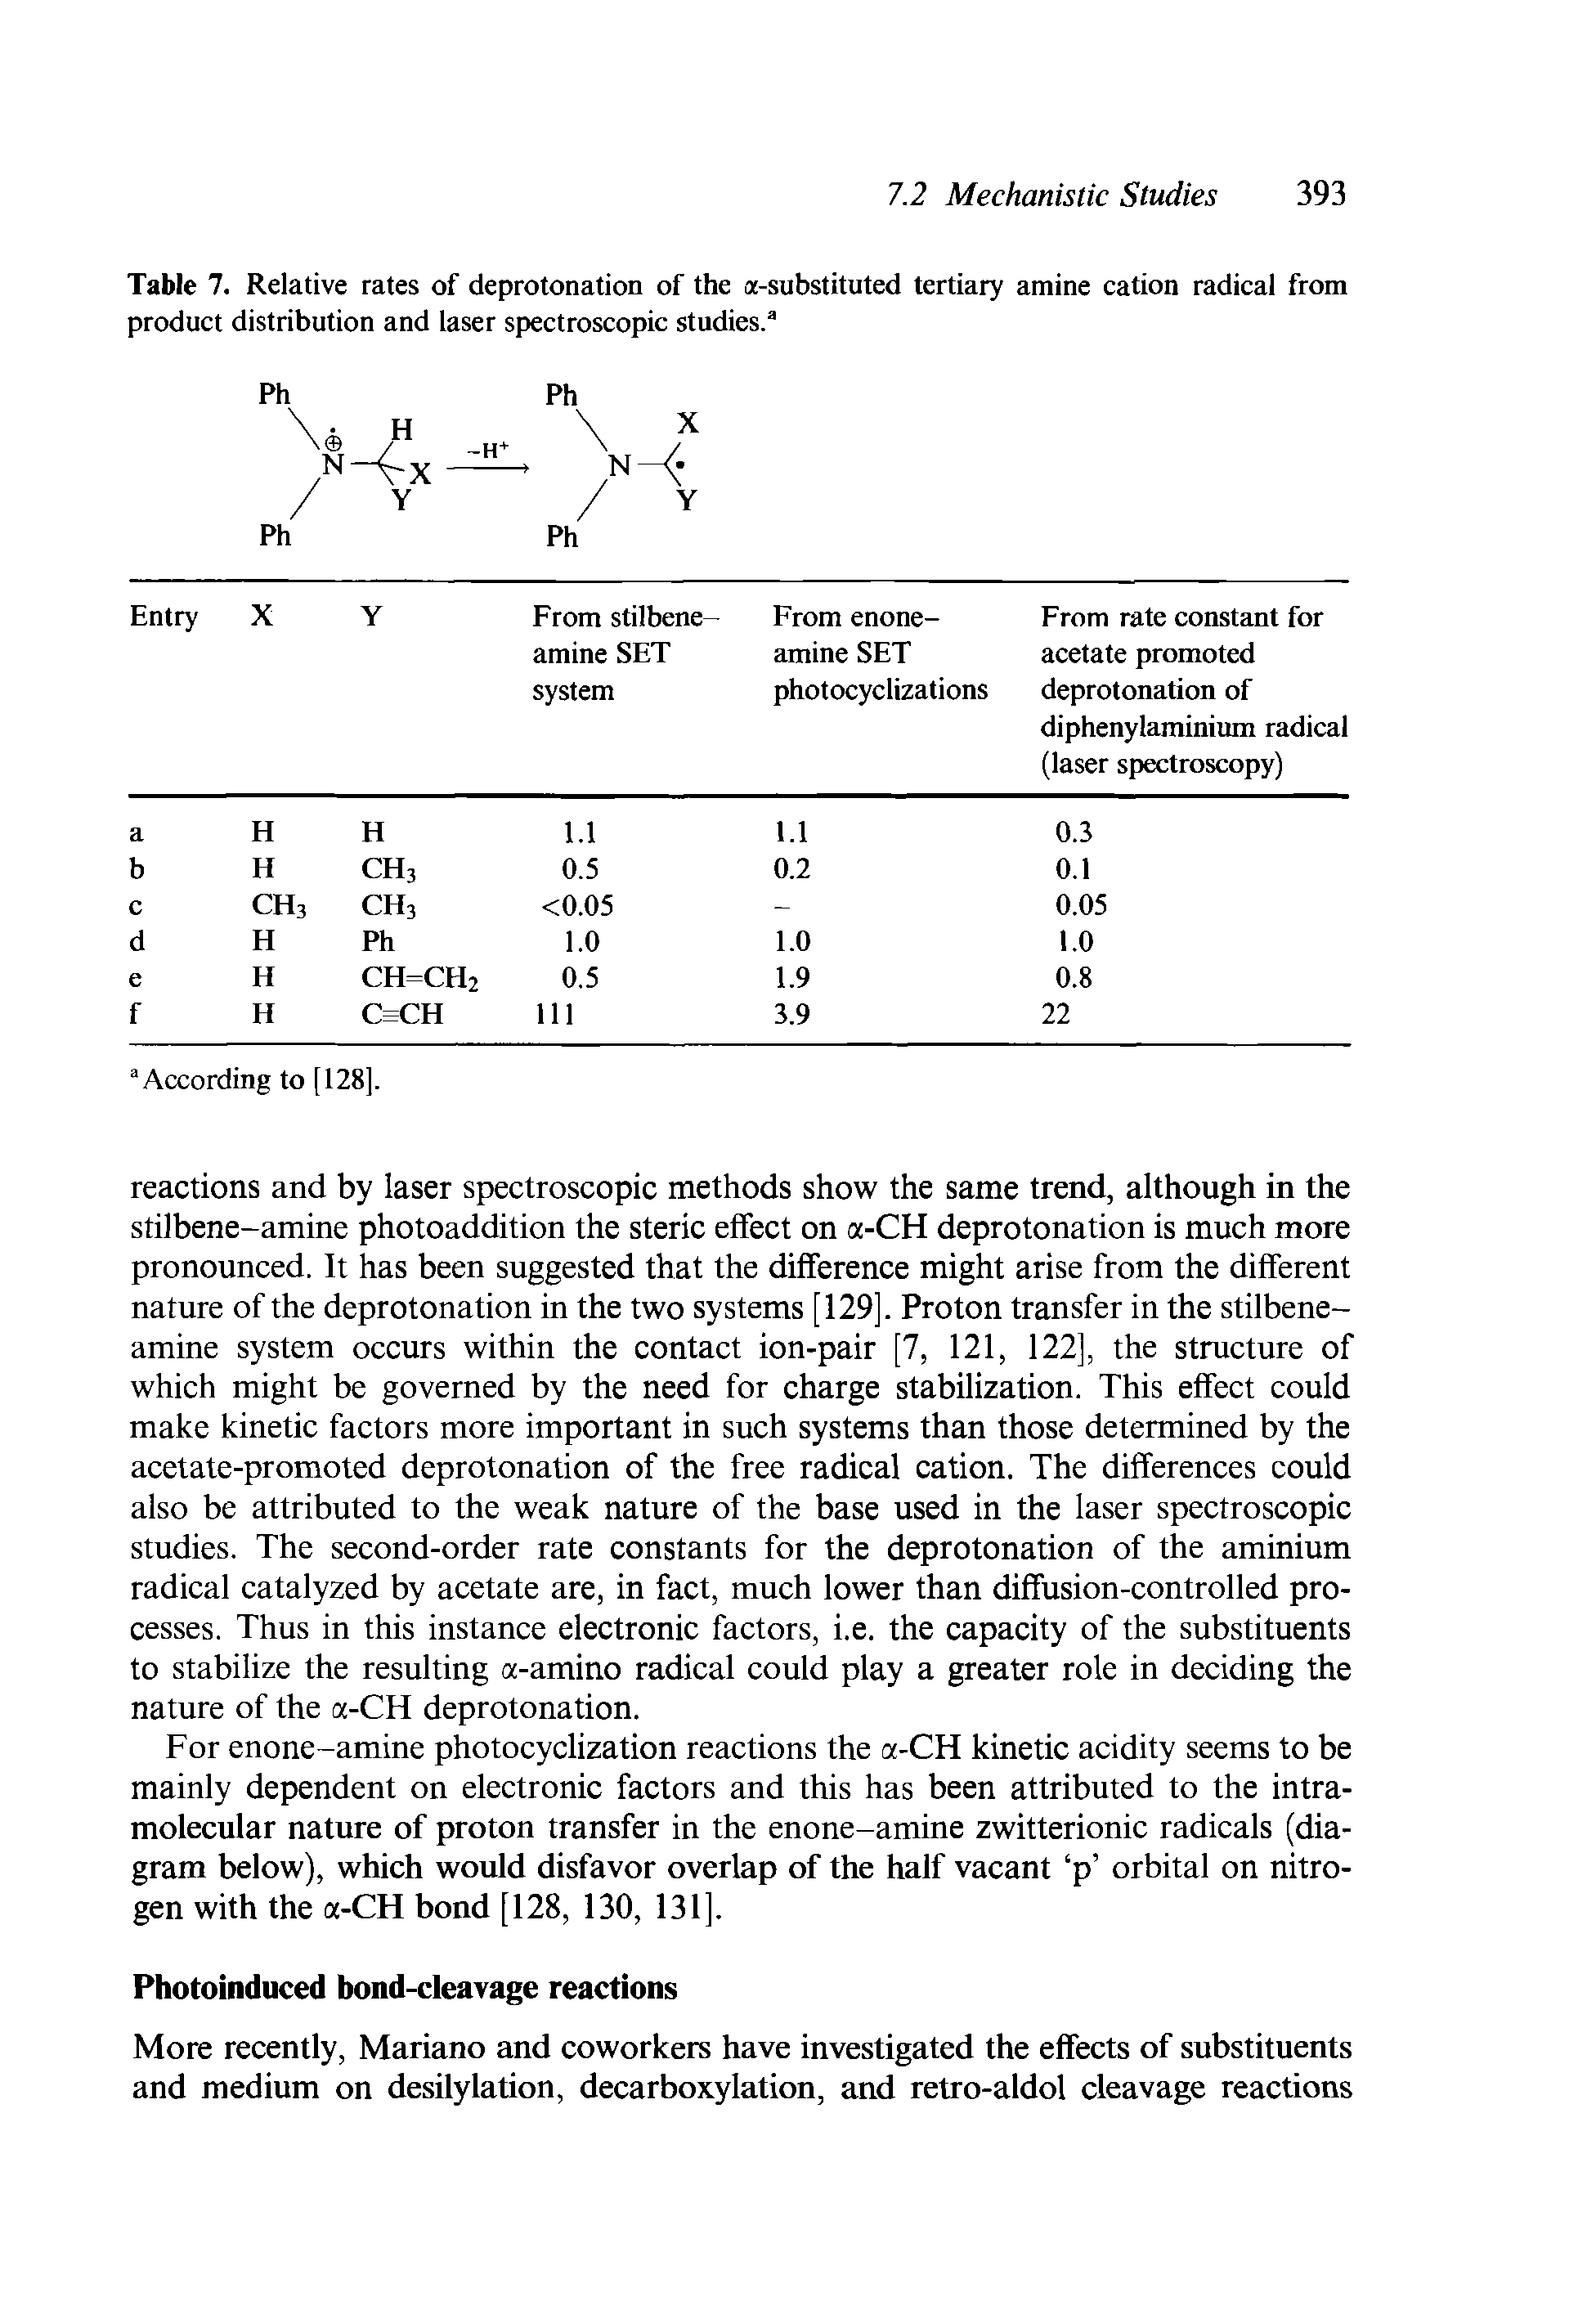 Table 7. Relative rates of deprotonation of the a-substituted tertiary amine cation radical from product distribution and laser spectroscopic studies. ...